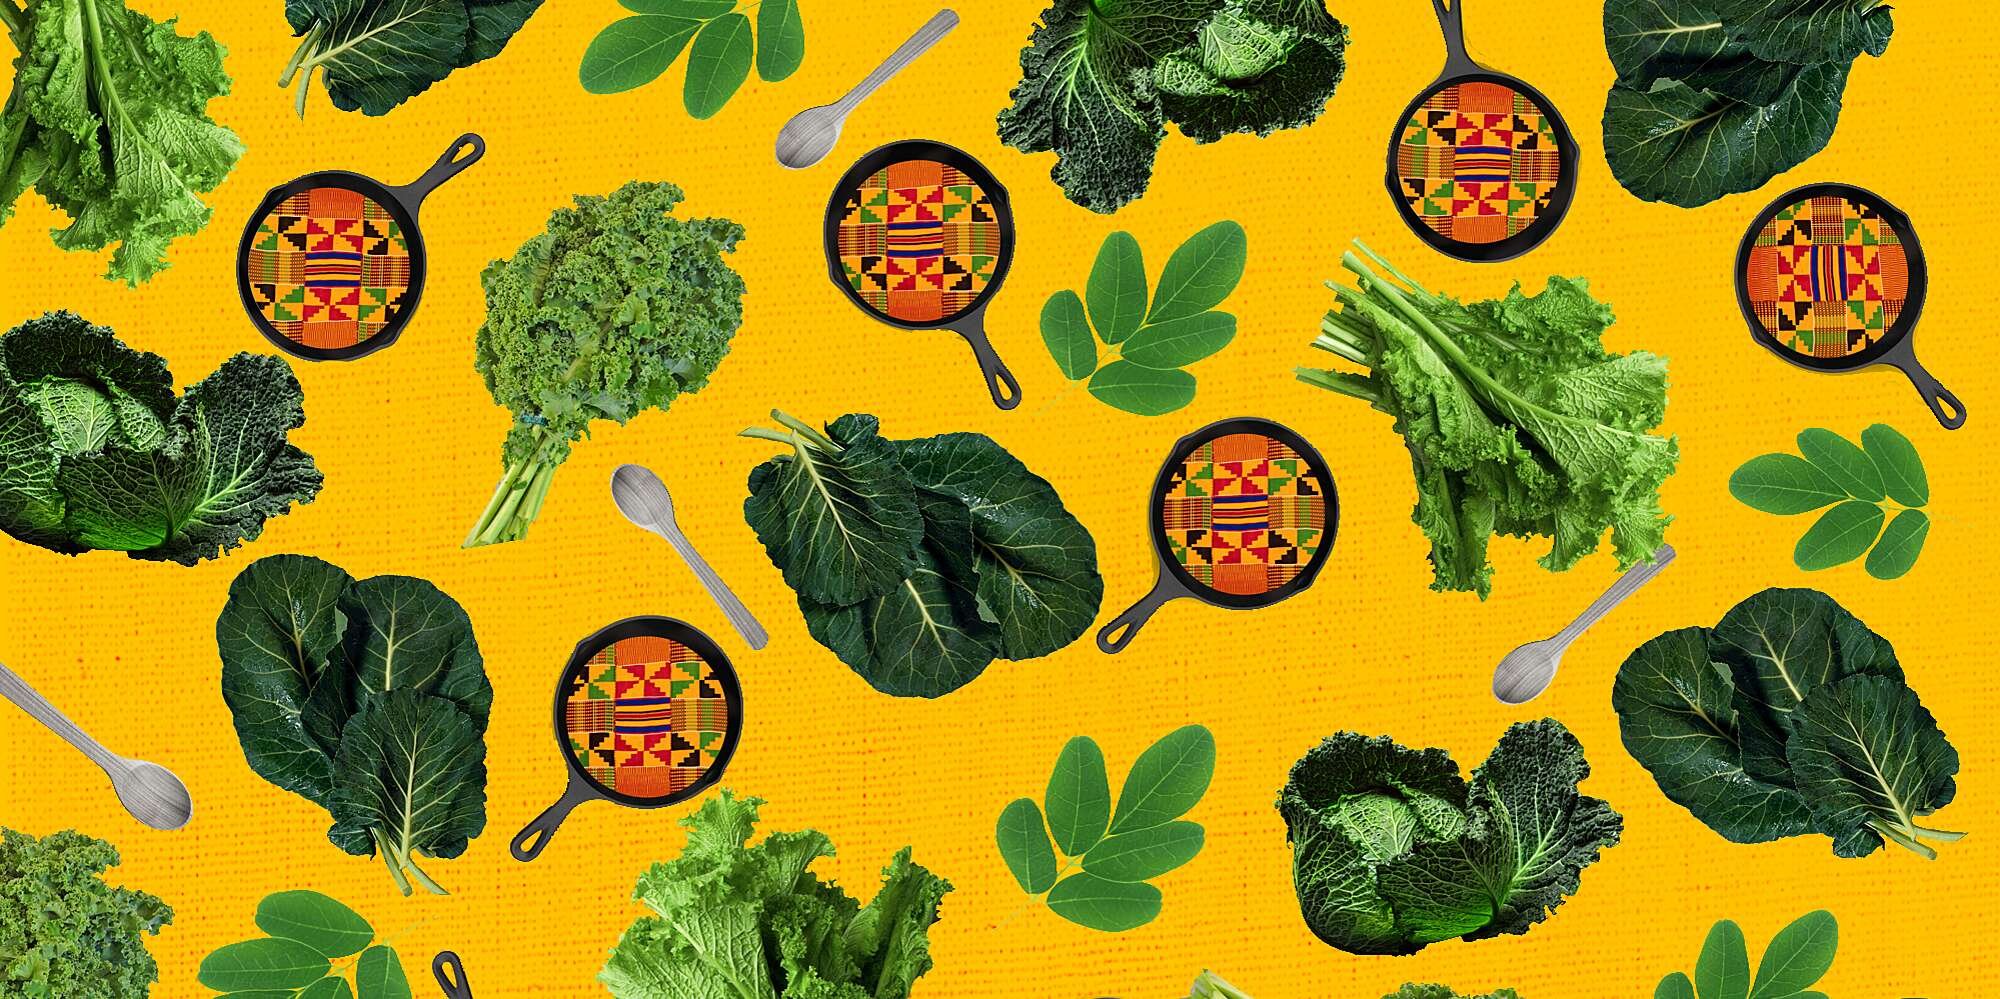 African Heritage Diet as Medicine: How Black Food Can Heal the Community